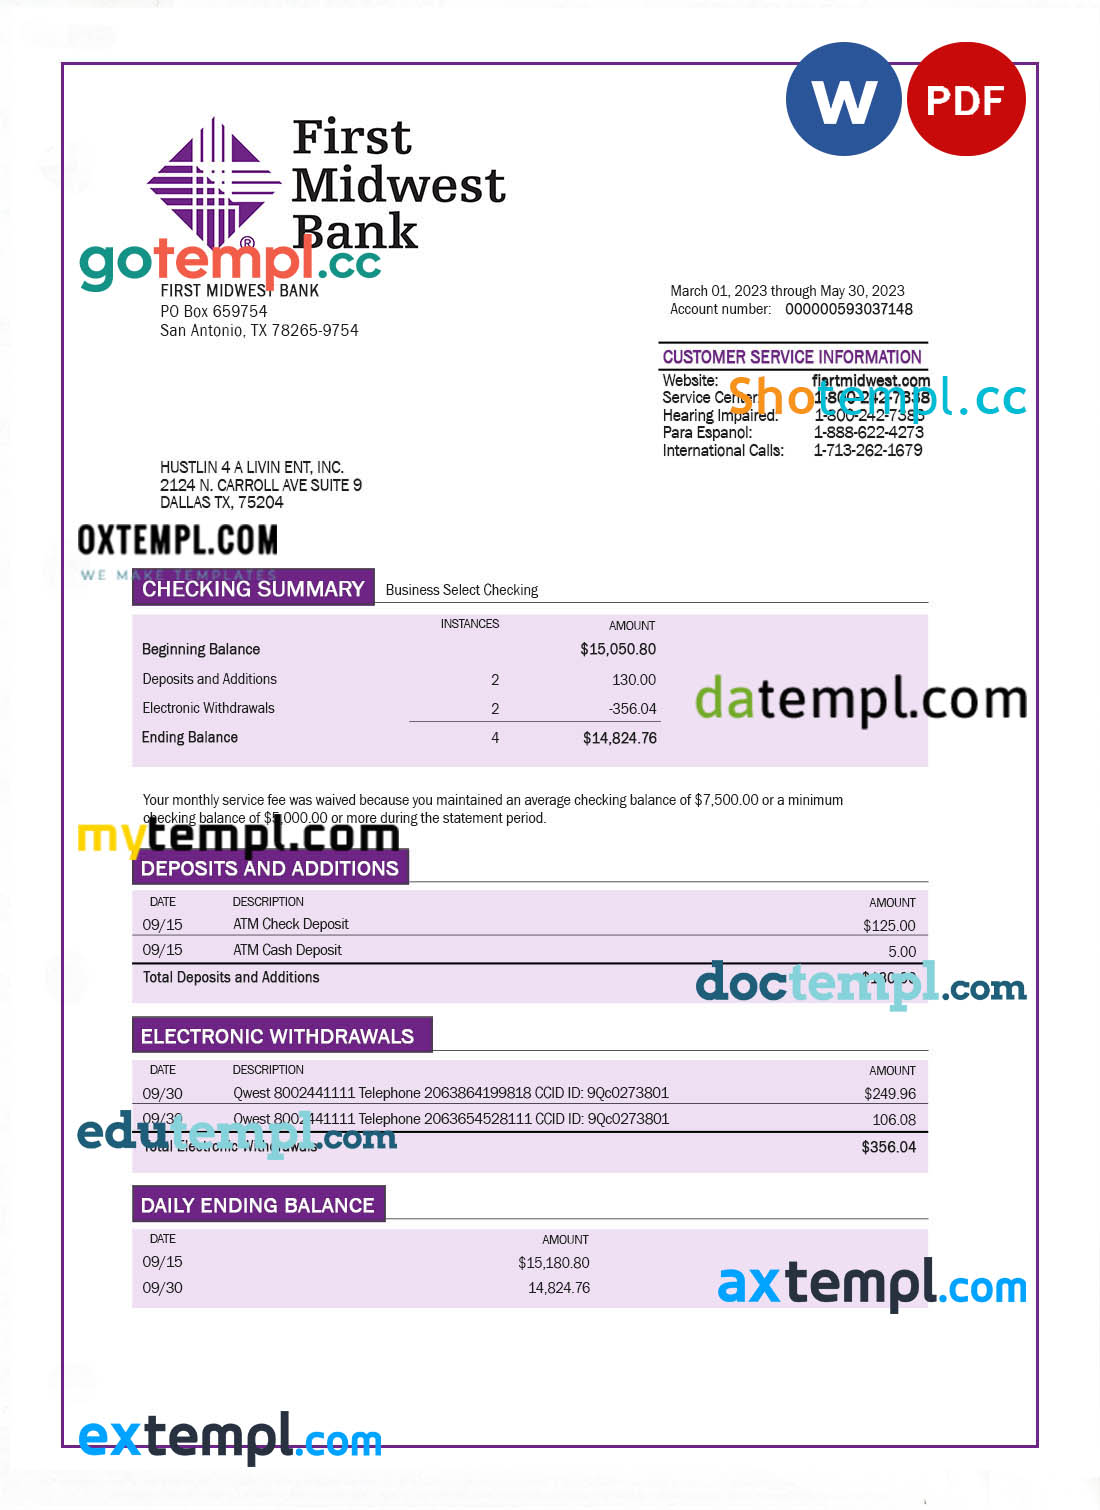 First Midwest Bank company account statement Word and PDF template